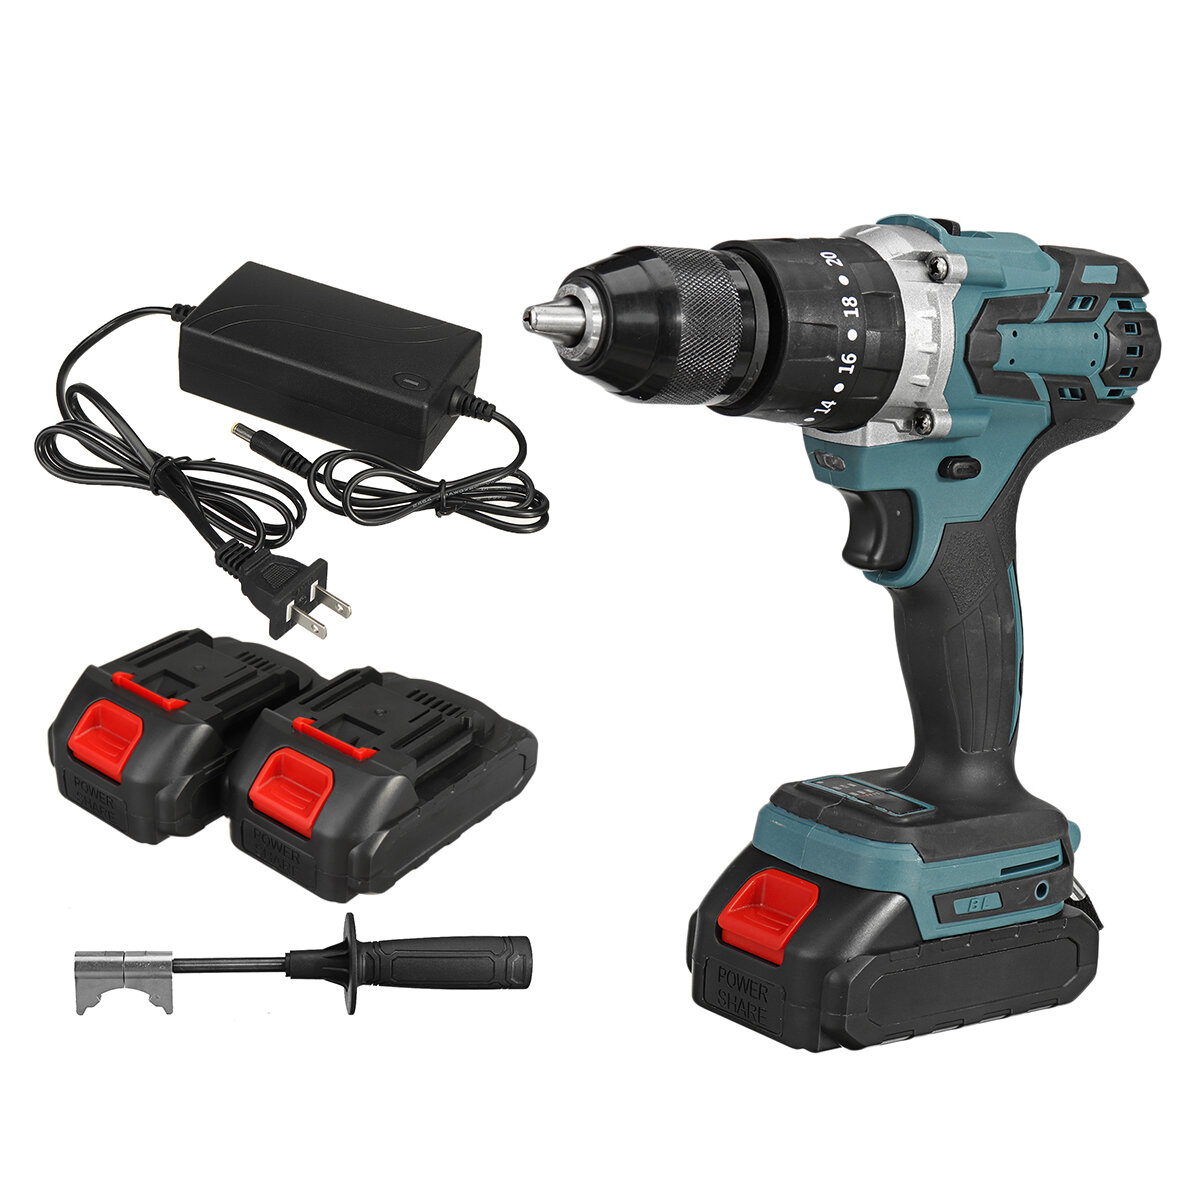 Image of Cordless Electric Impact Drill 3 in 1 Rechargeable Drill Screwdriver 13mm Chuck W/ 1 or 2 Li-ion Battery For Makita